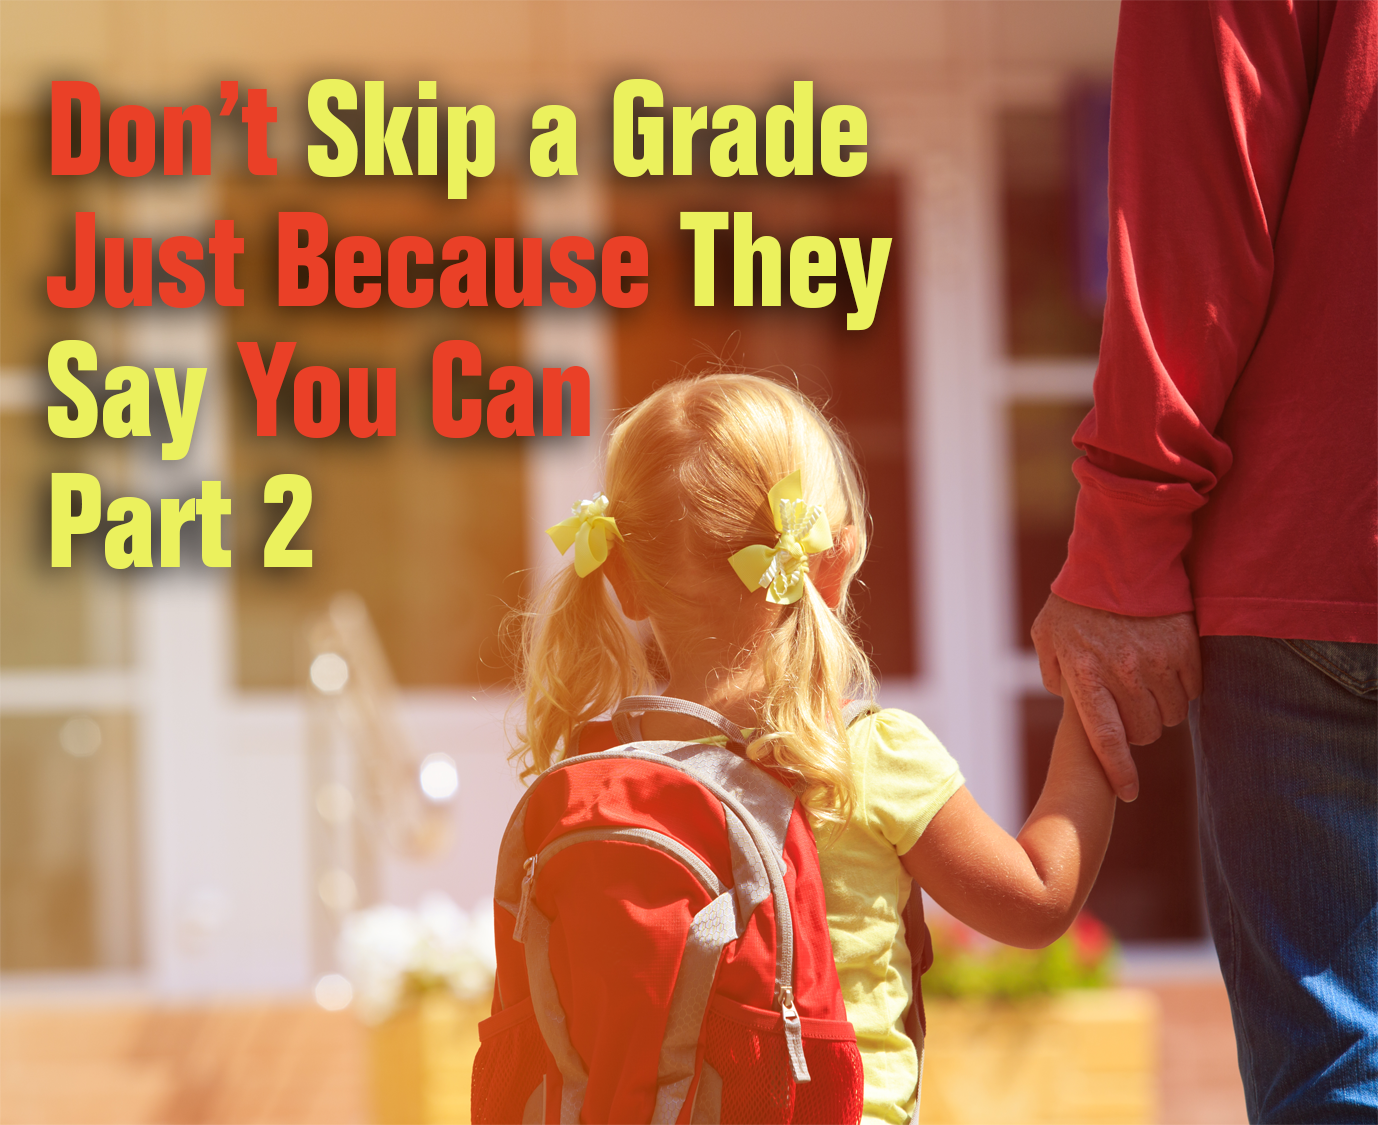 Don’t Just Skip A Grade Because They Say You Can: Part 2